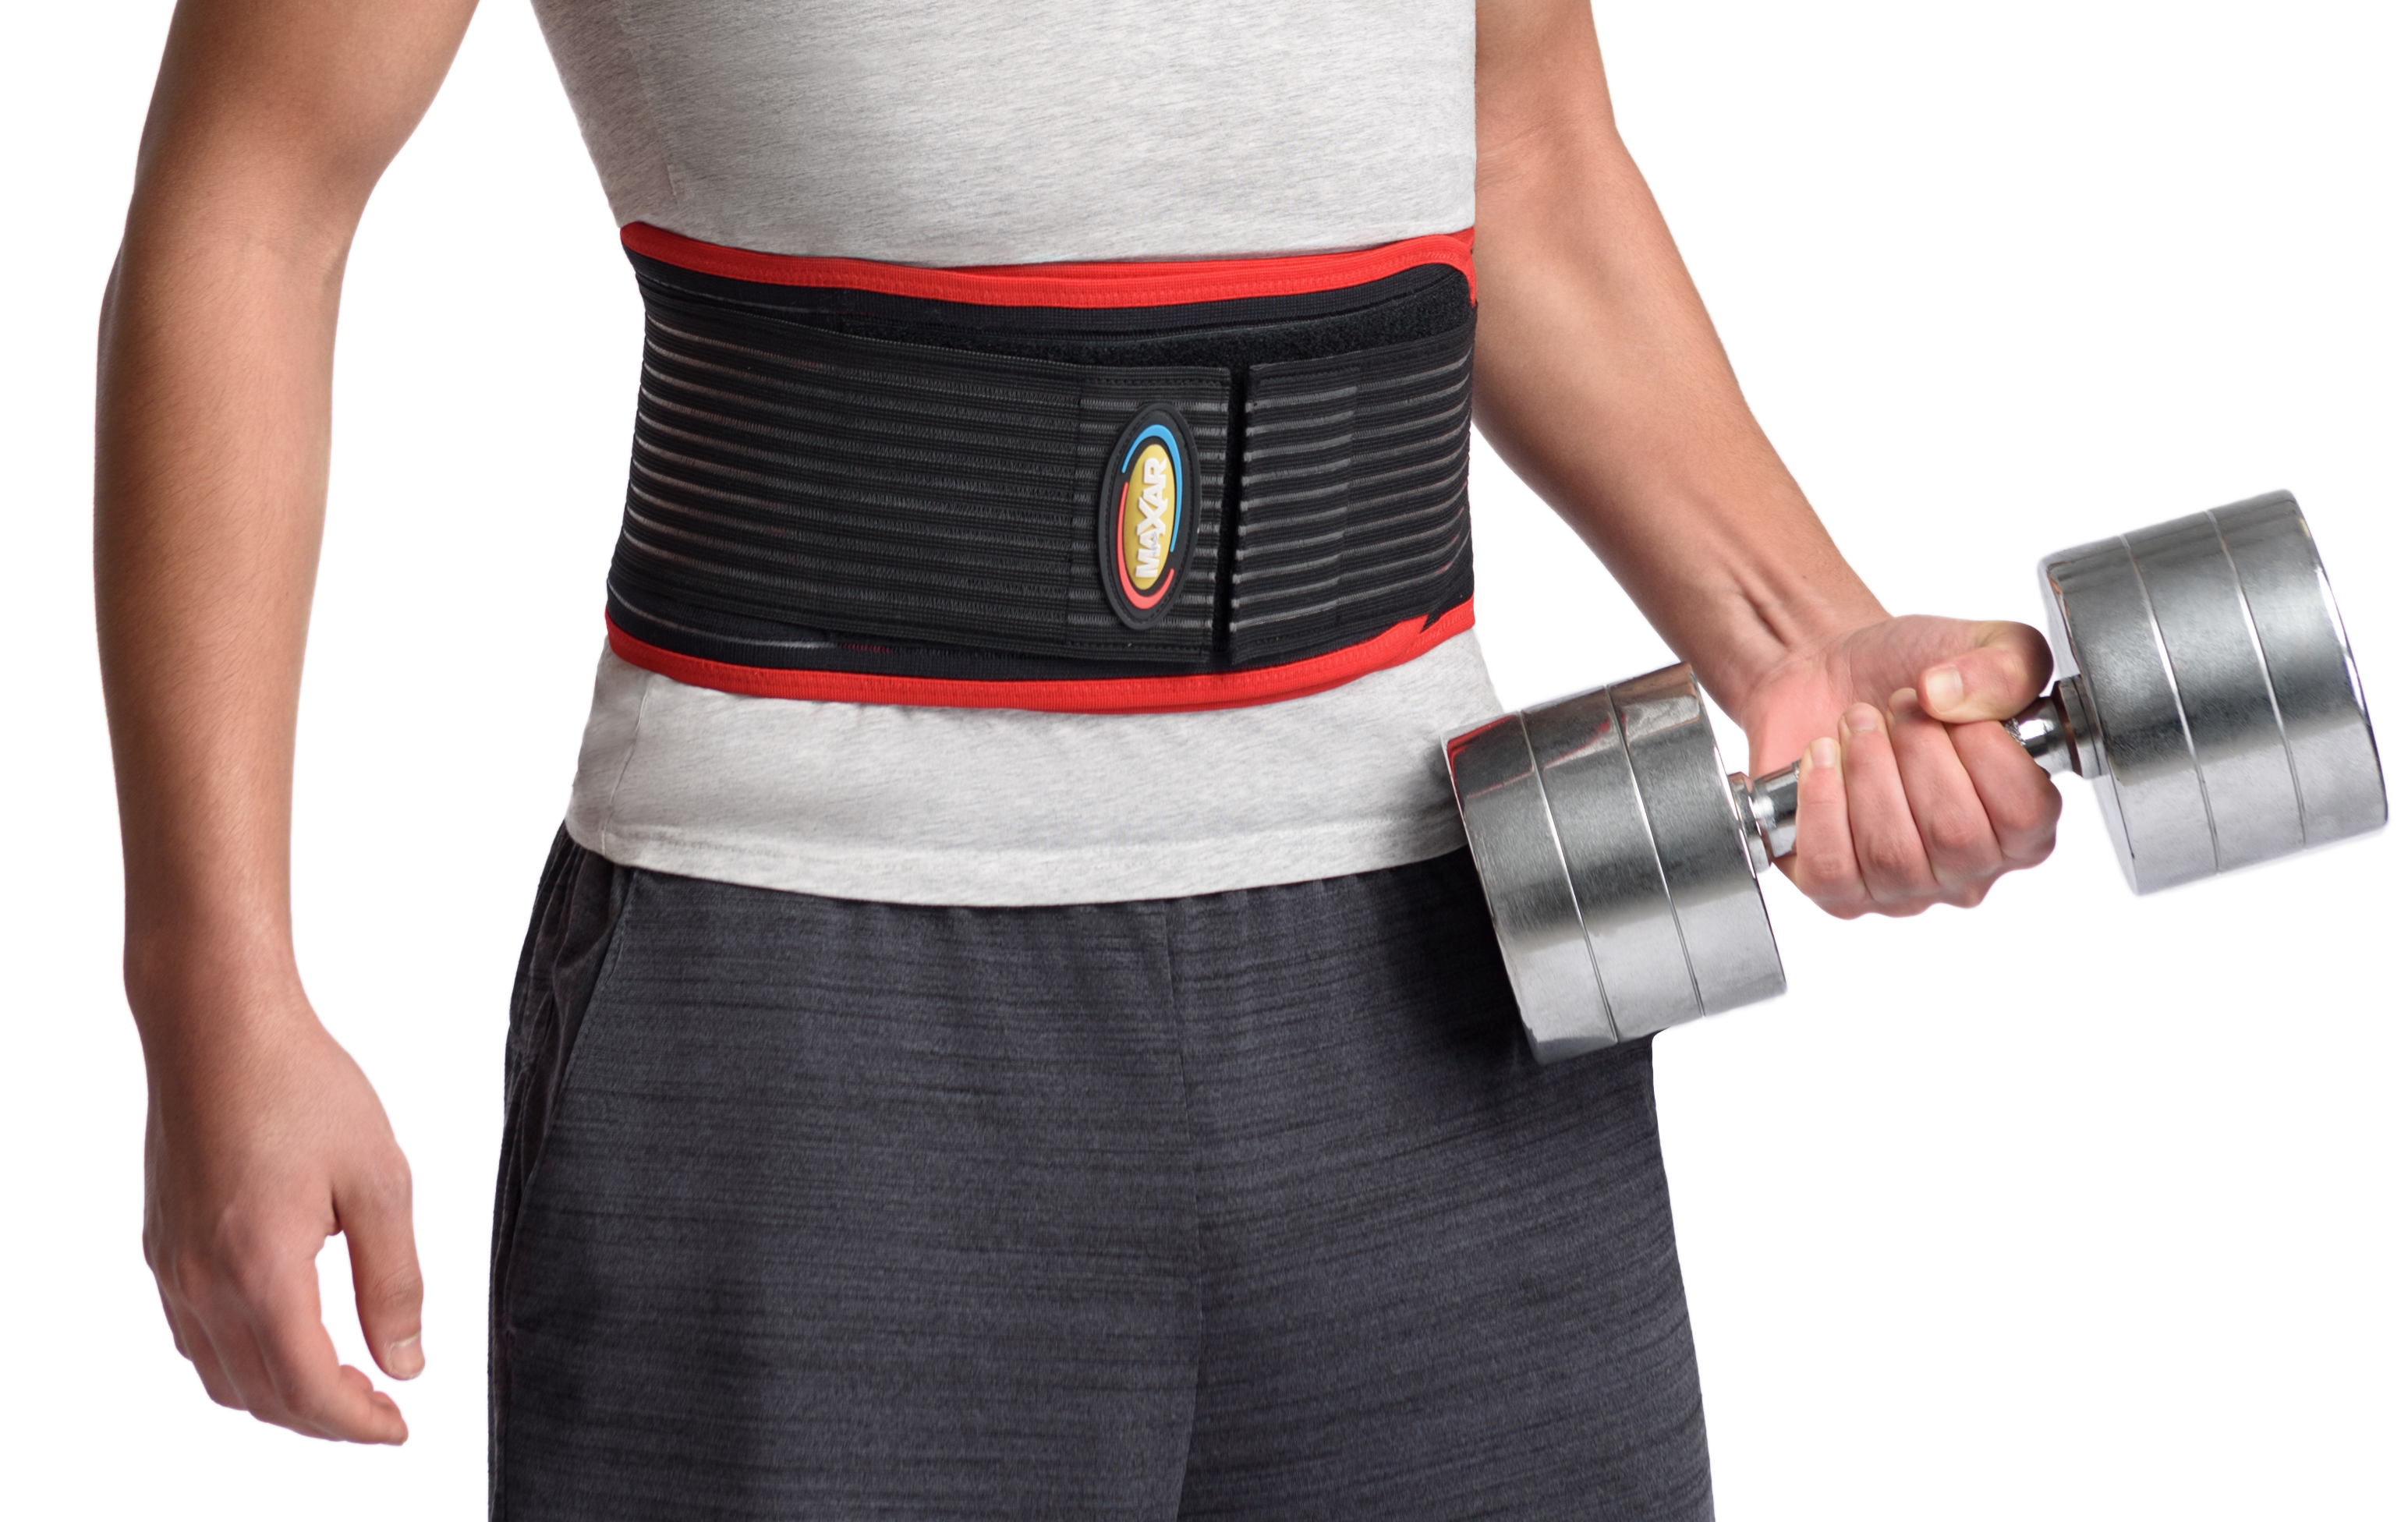 MAXAR Bio-Magnetic Deluxe Back Support Belt - Far Infrared with Cera Heat Fabric: BMS-511